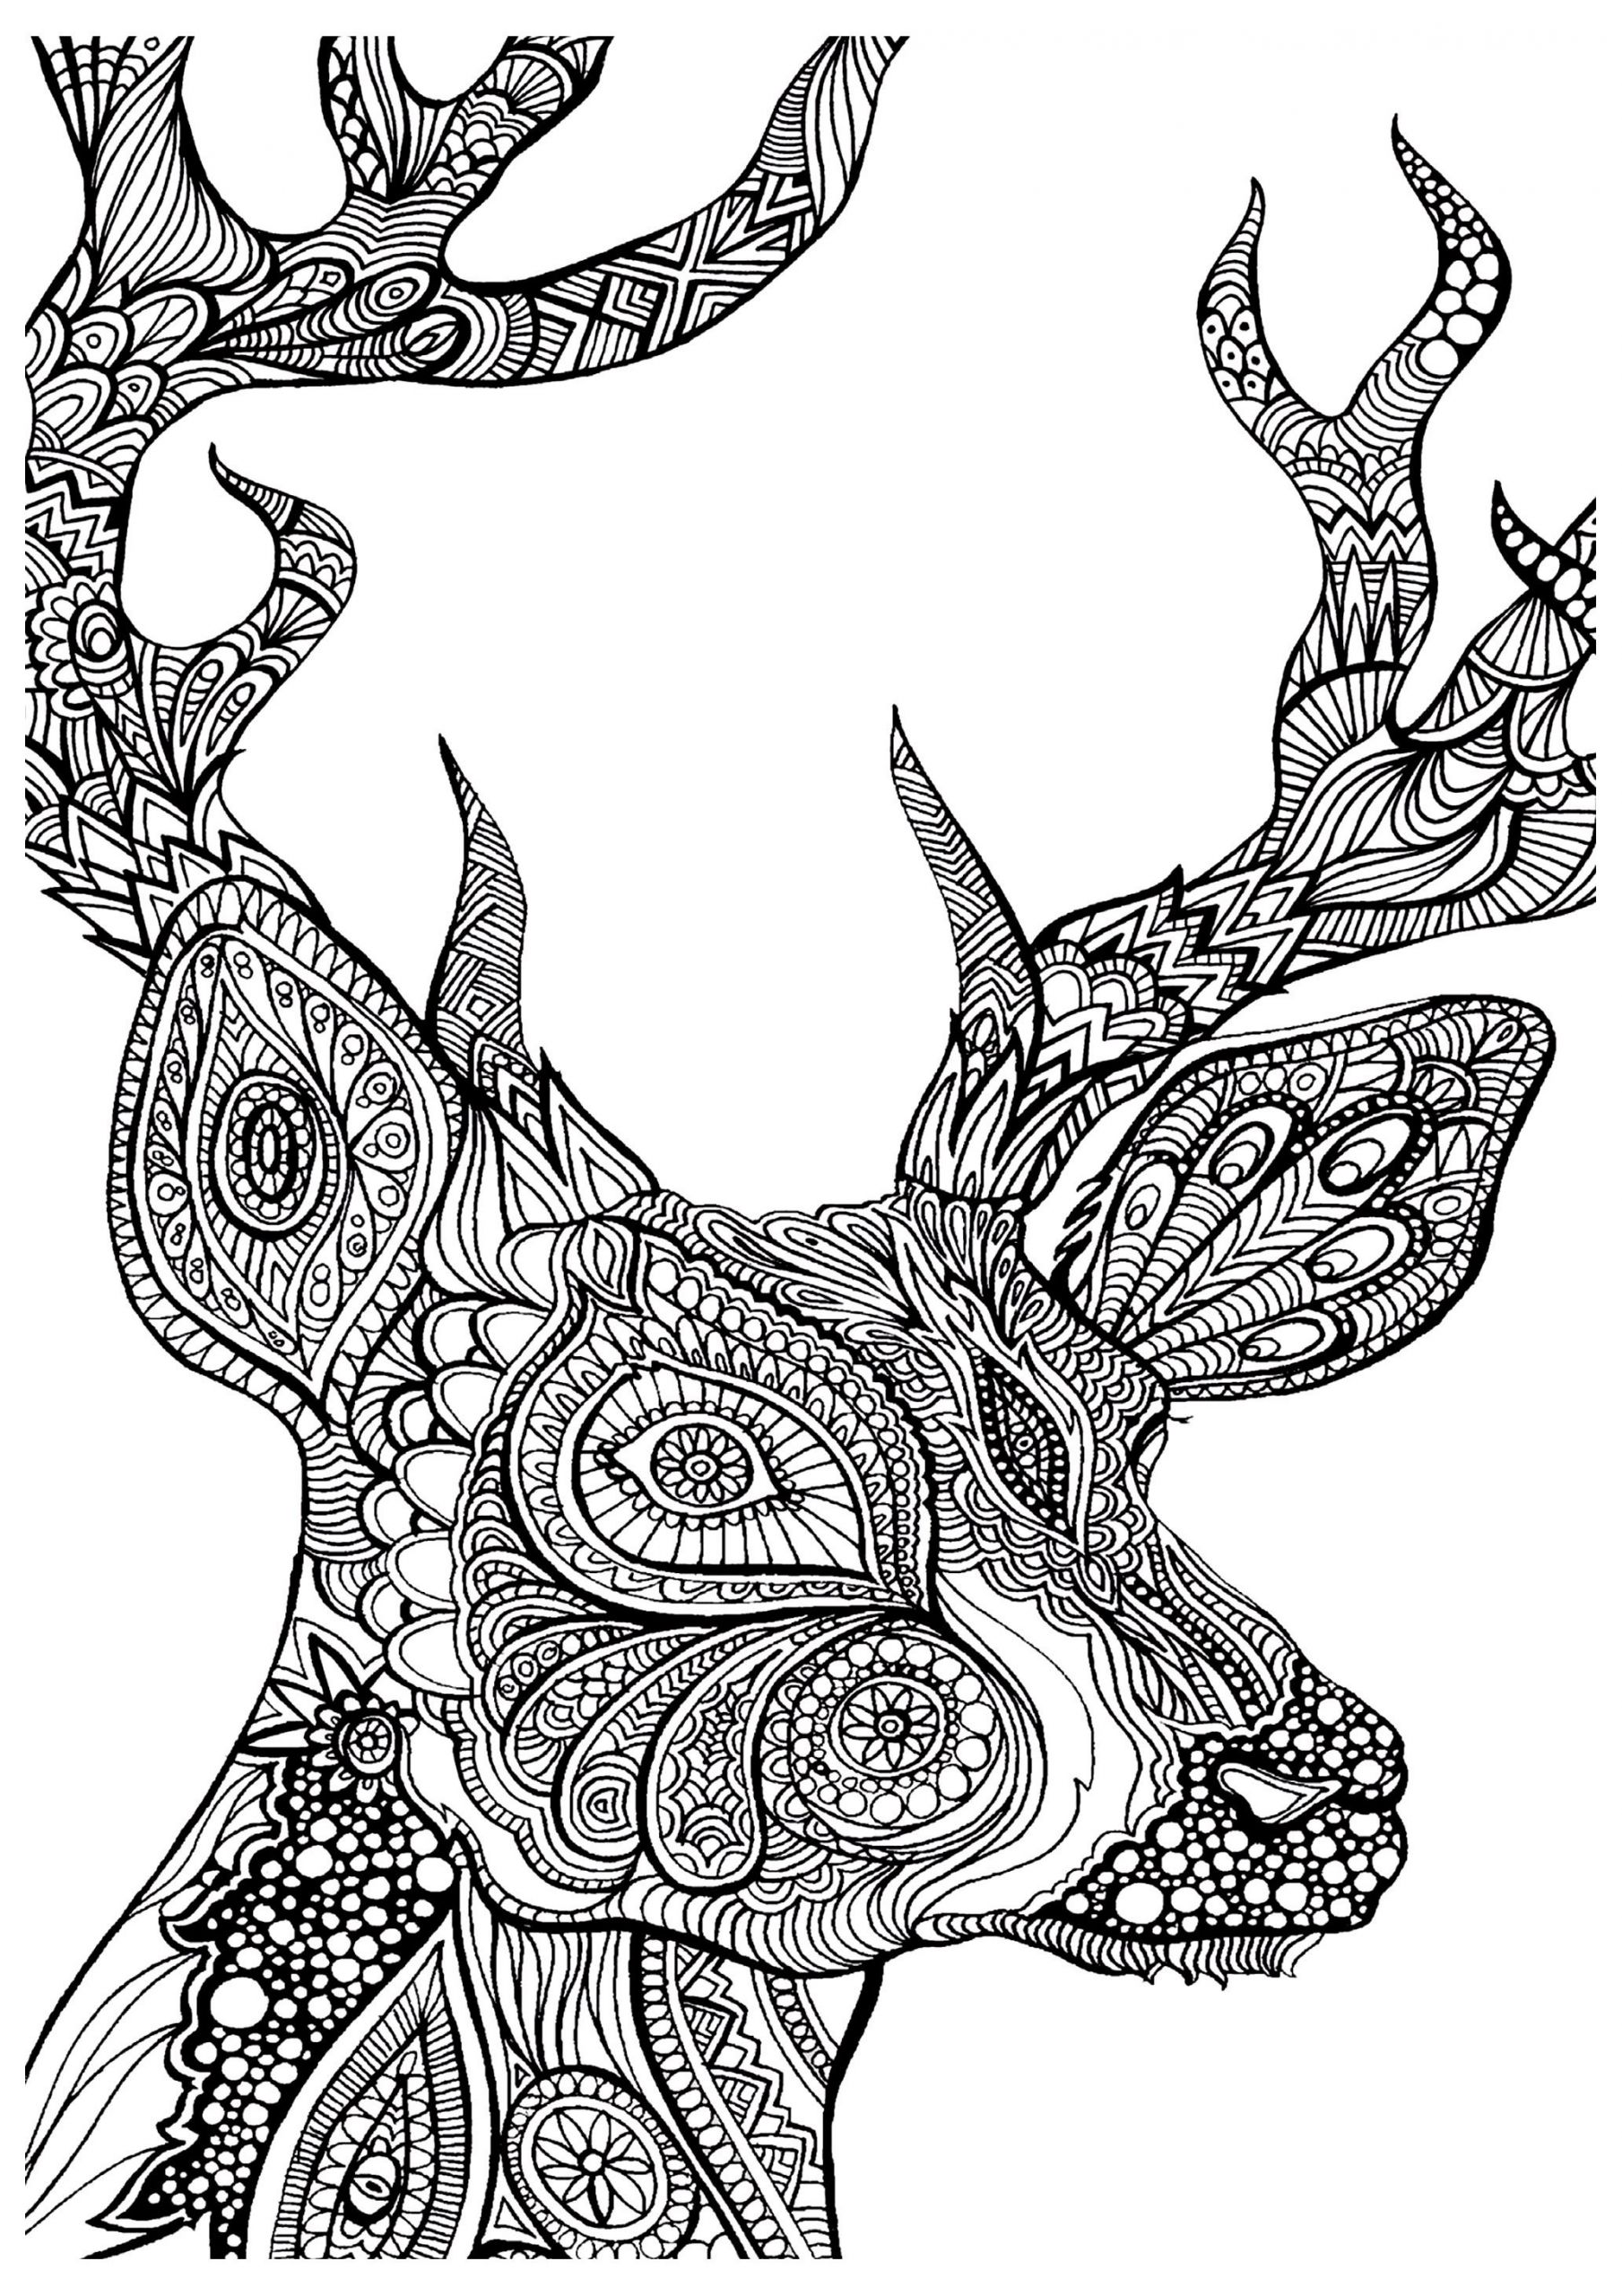 Adult Coloring Free Pages
 19 of the Best Adult Colouring Pages Free Printables for